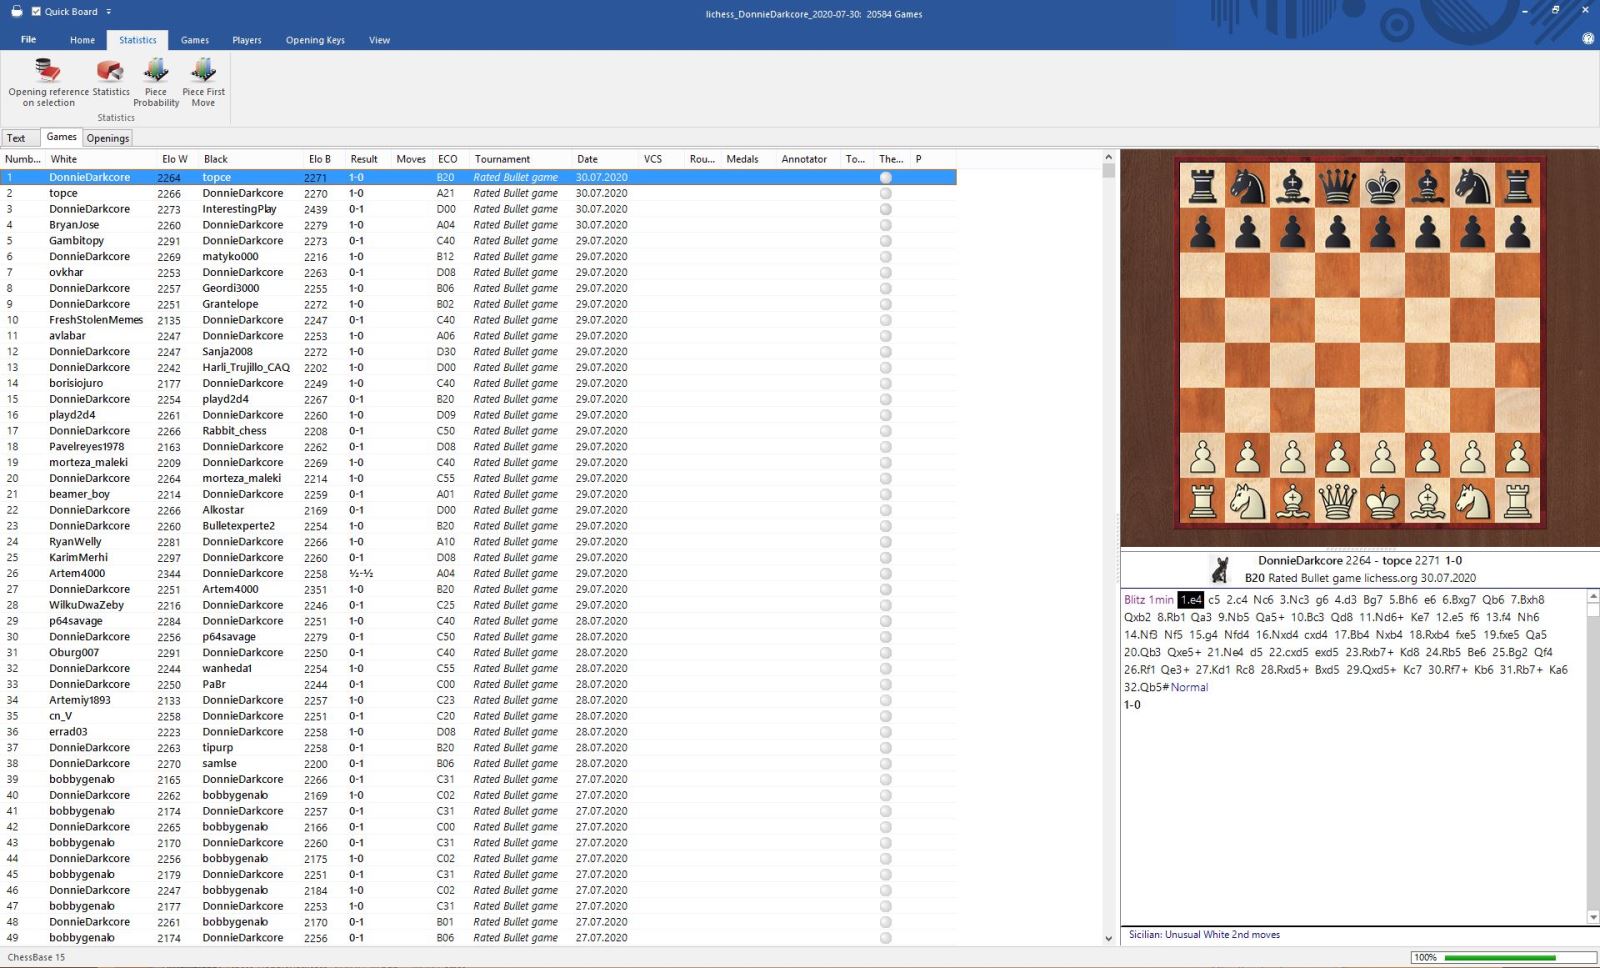 How good is my opening, ChessBase?